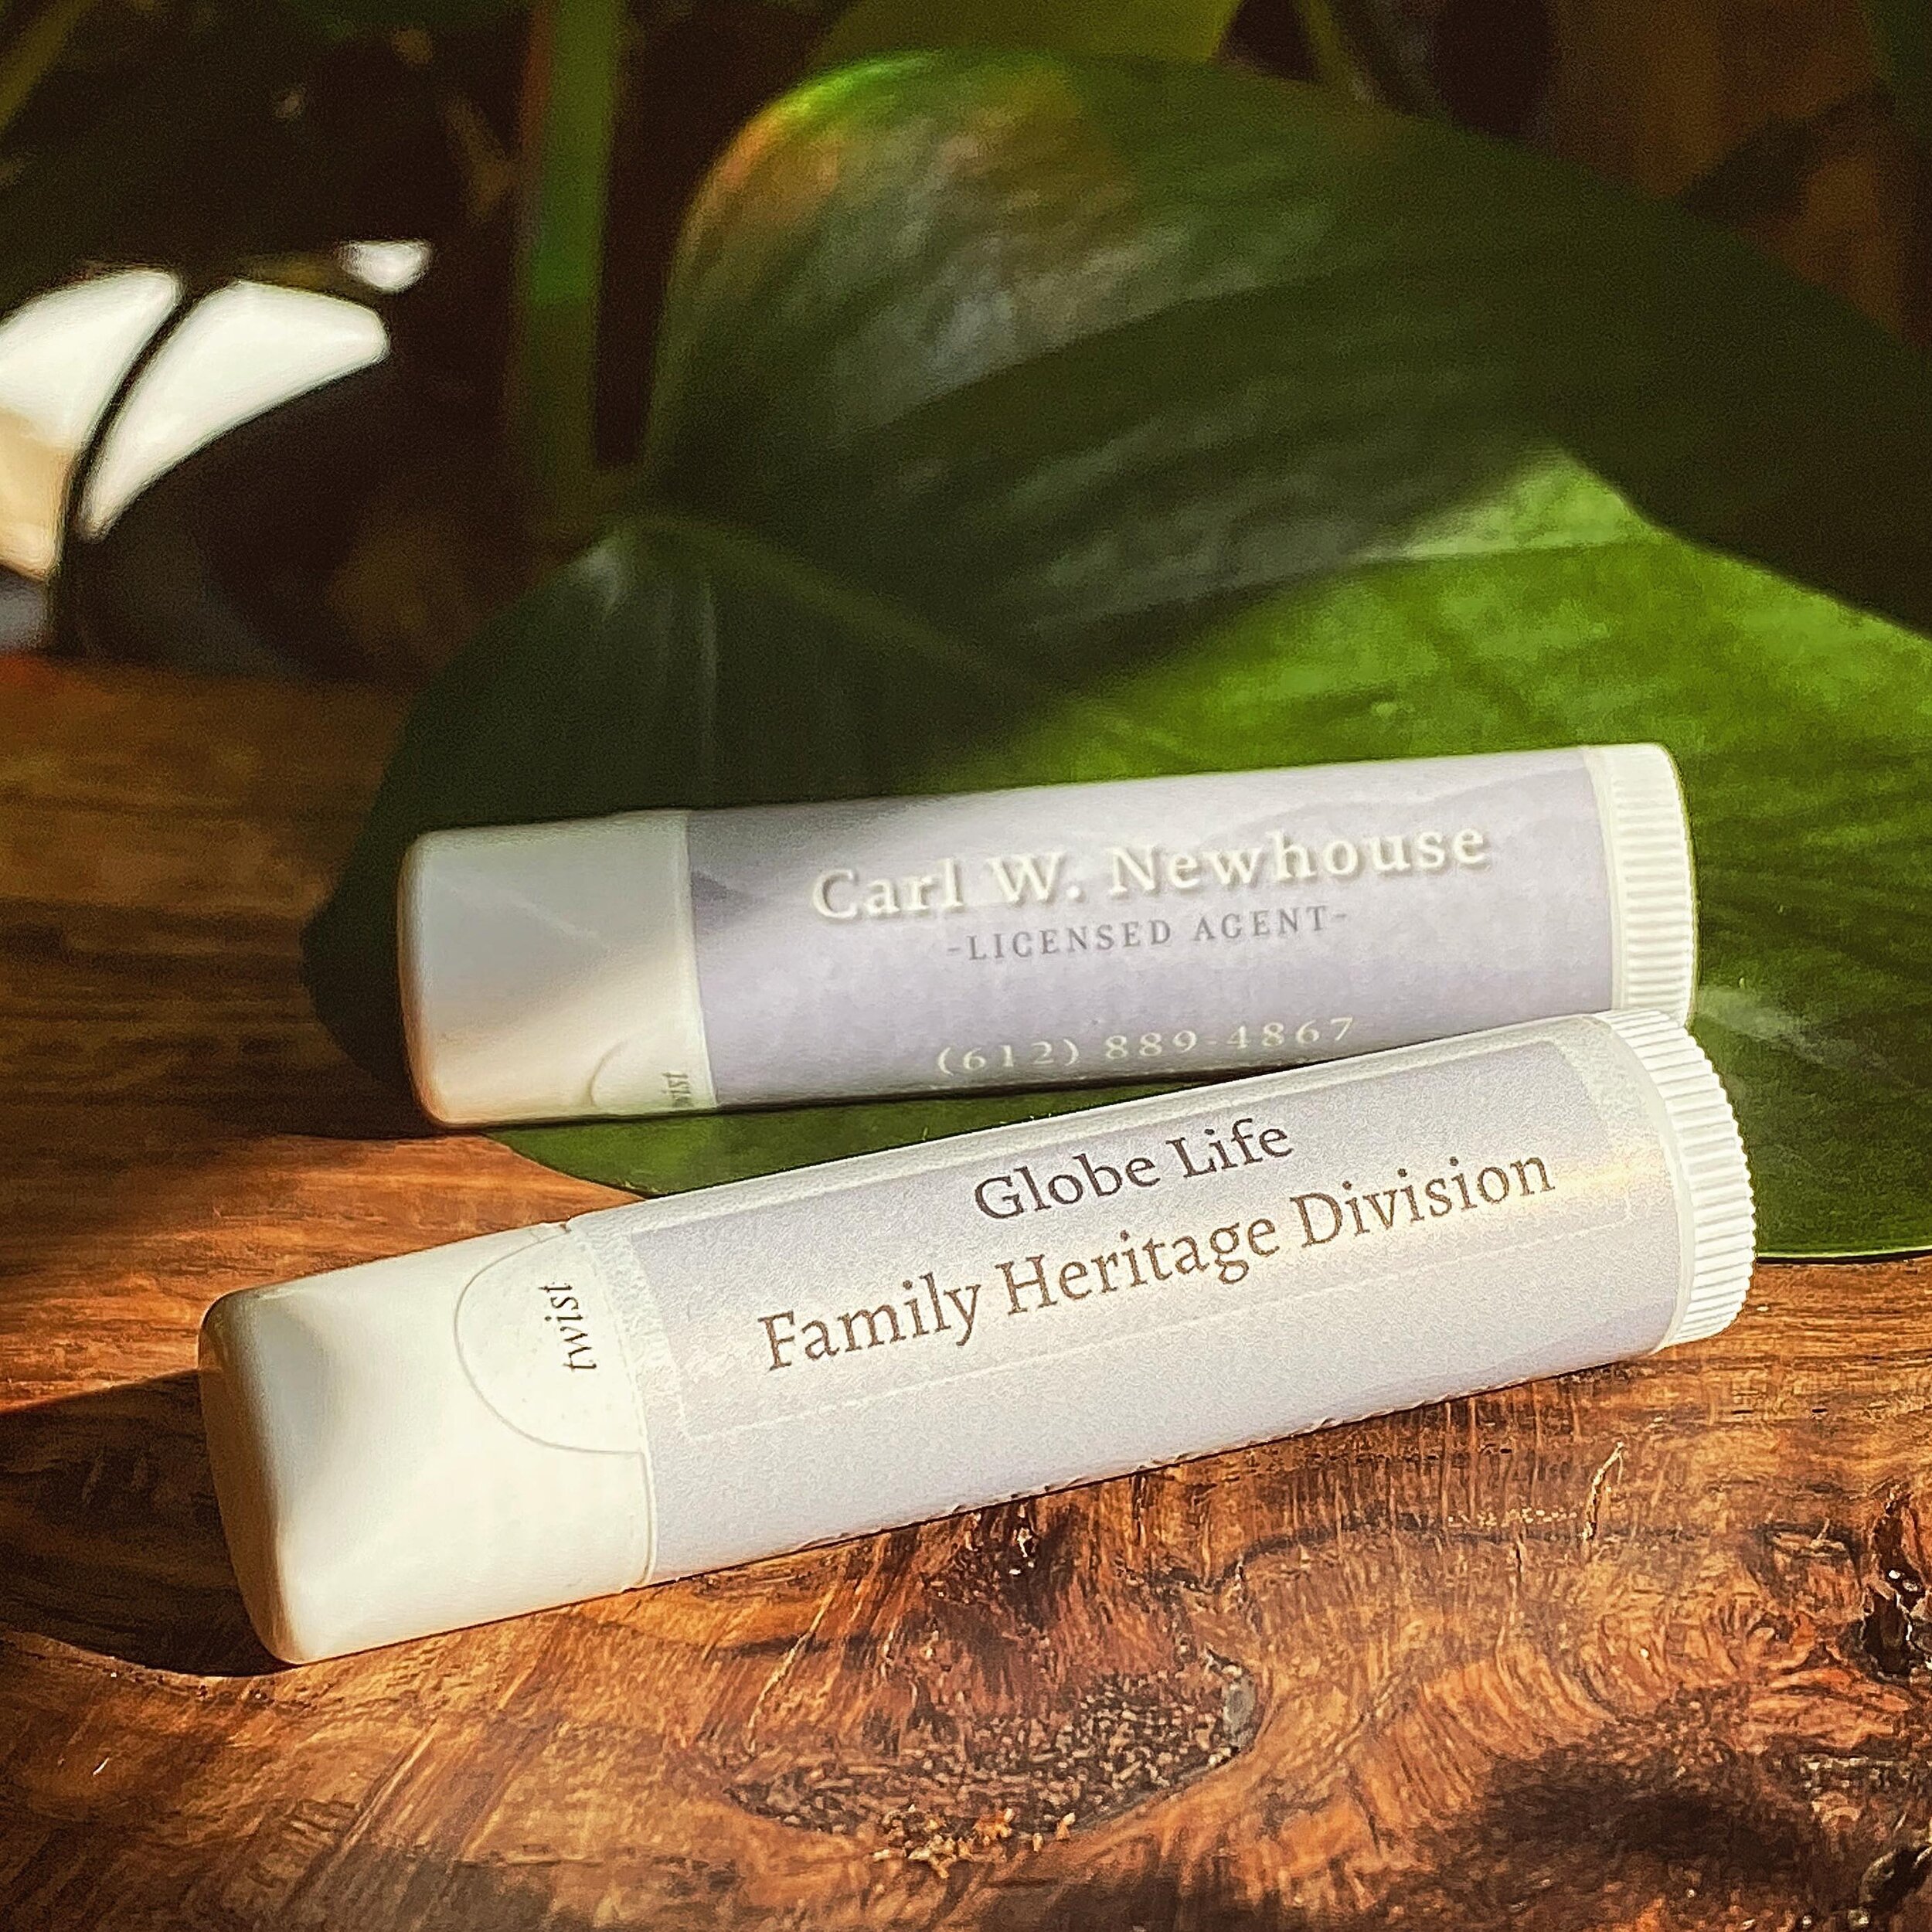 A better kind of business card ✨
&bull;
&bull;
&bull;
&bull;

#smallbusiness #lipbalm #privatelabel #allnatural #safeskincare #privatelabel #wisconsinsmallbusiness #womenowned #eauclaire #womenownedbusiness #intaca #advertising #abc #somethingspecial